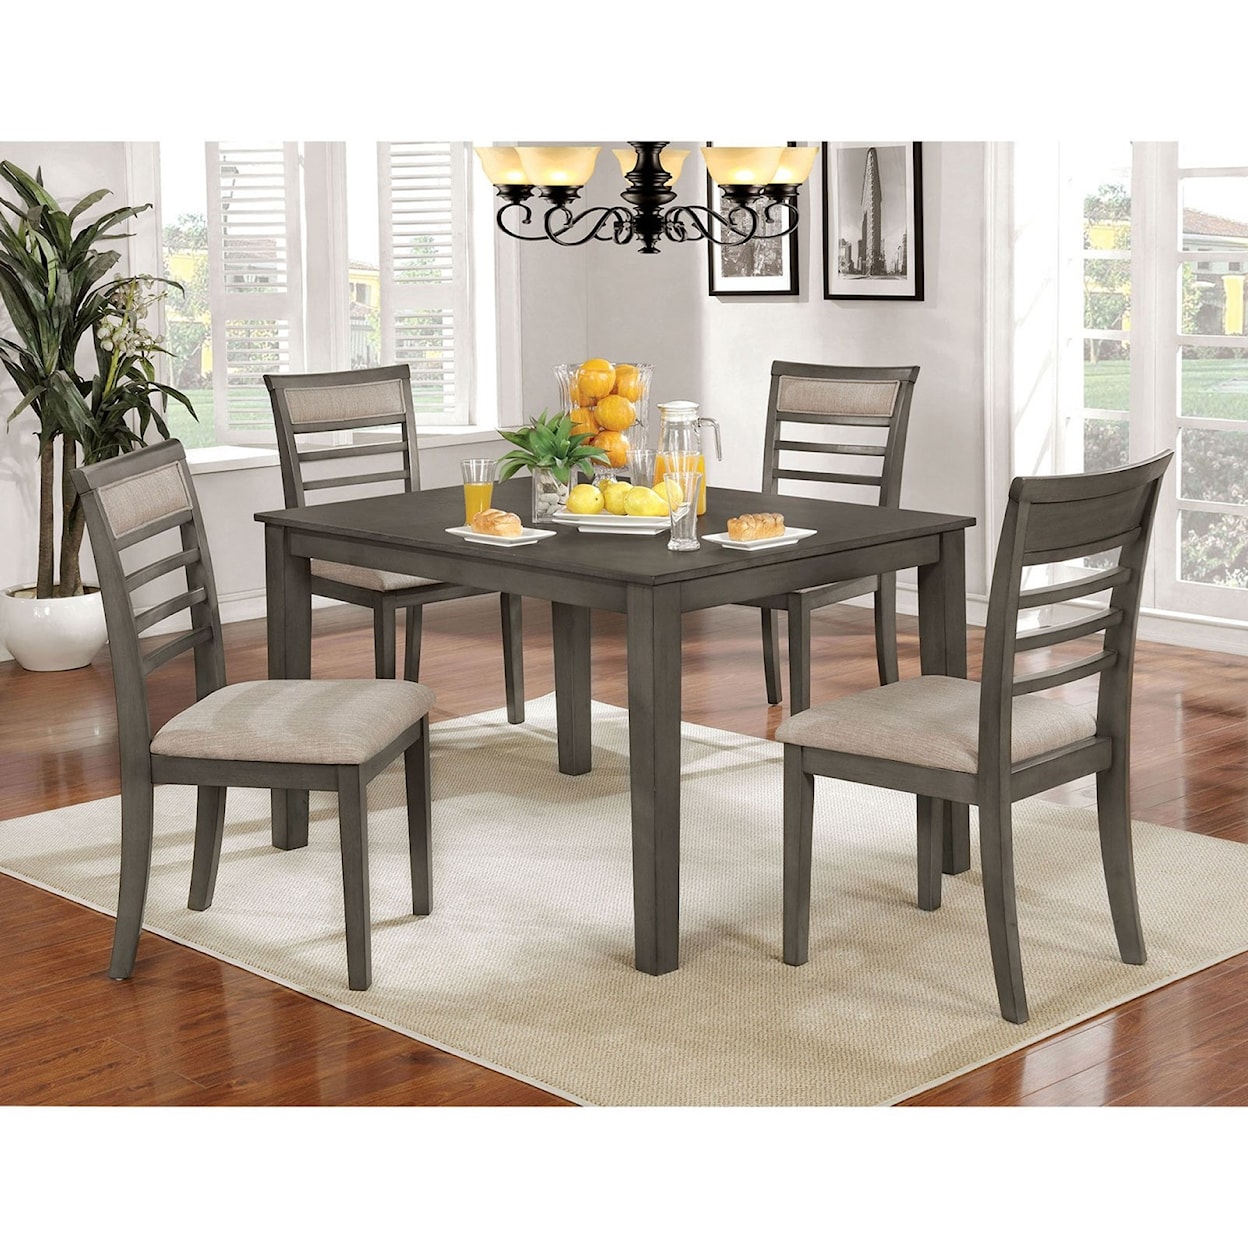 Furniture of America - FOA Fafnir 5 Piece Table and Chair Set